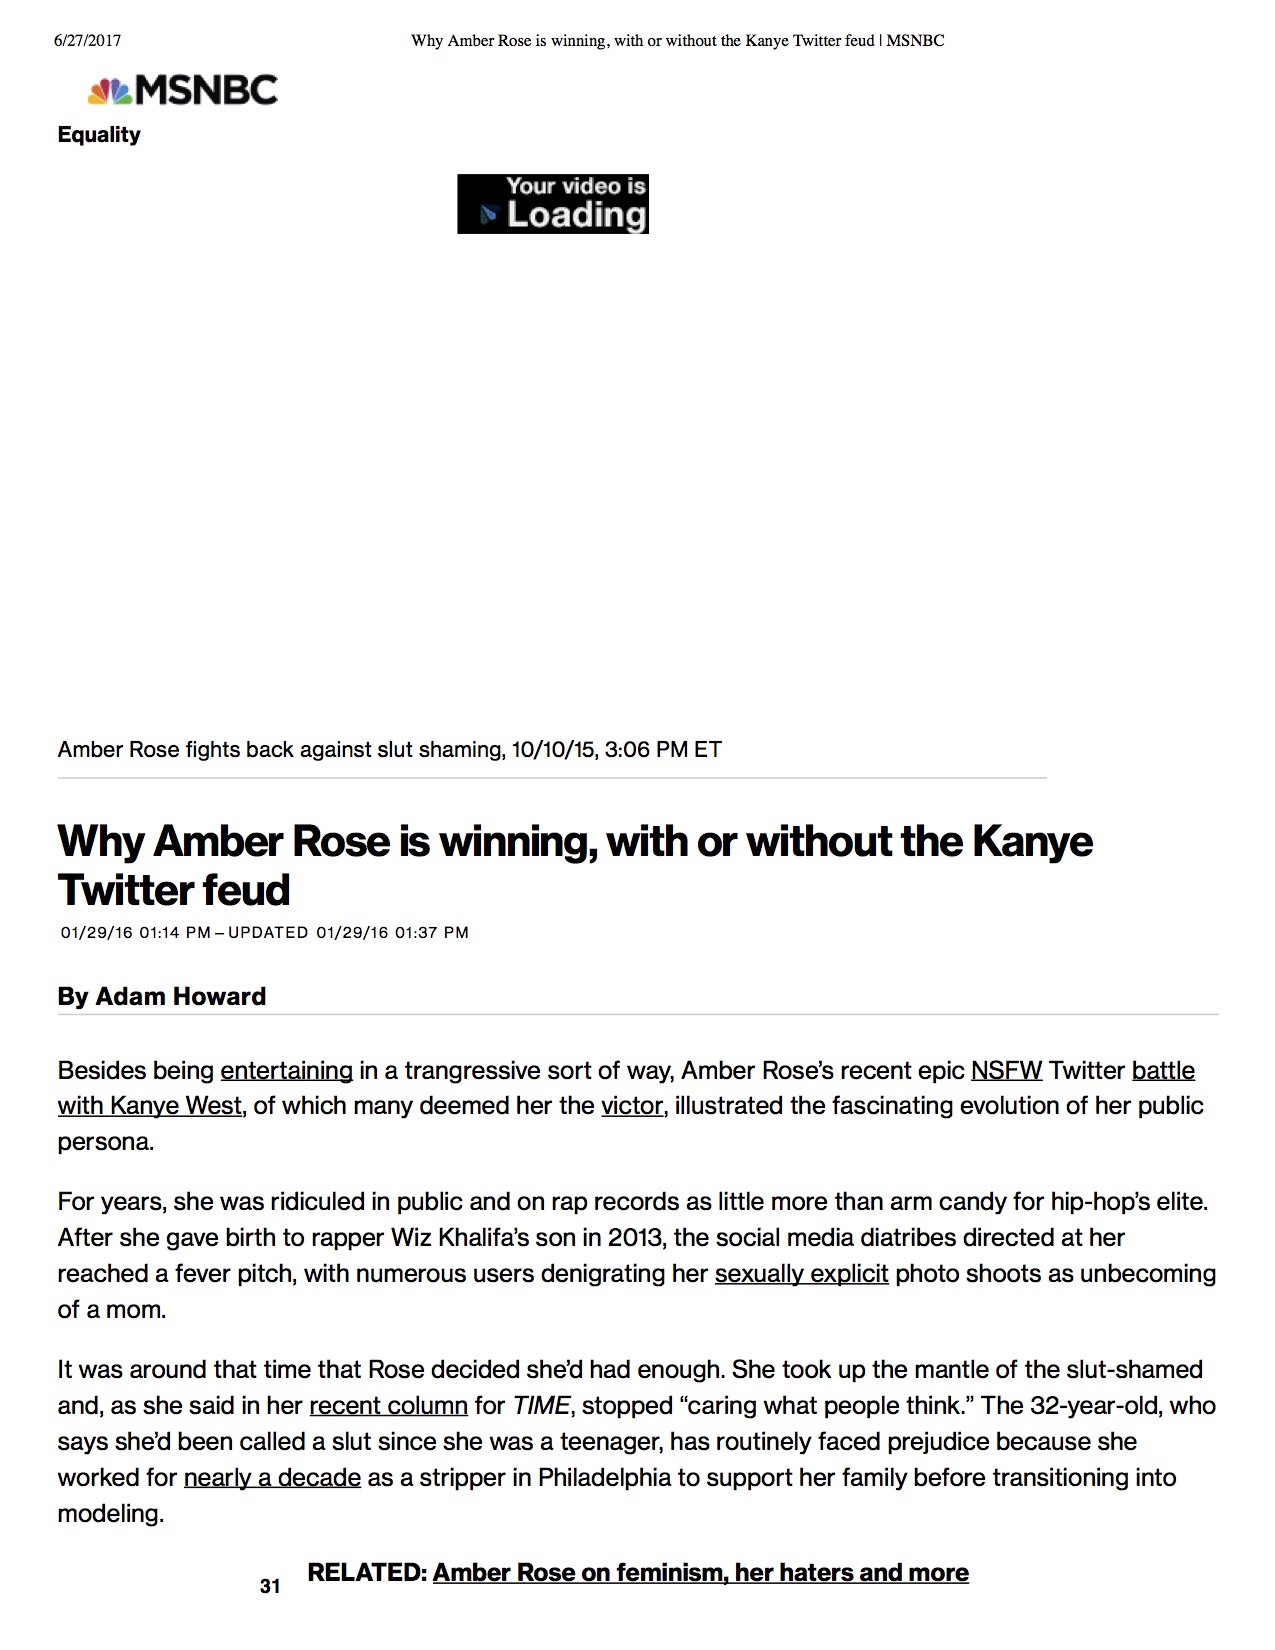 1Why Amber Rose is winning, with or without the Kanye Twitter feud _ MSNBC.jpg